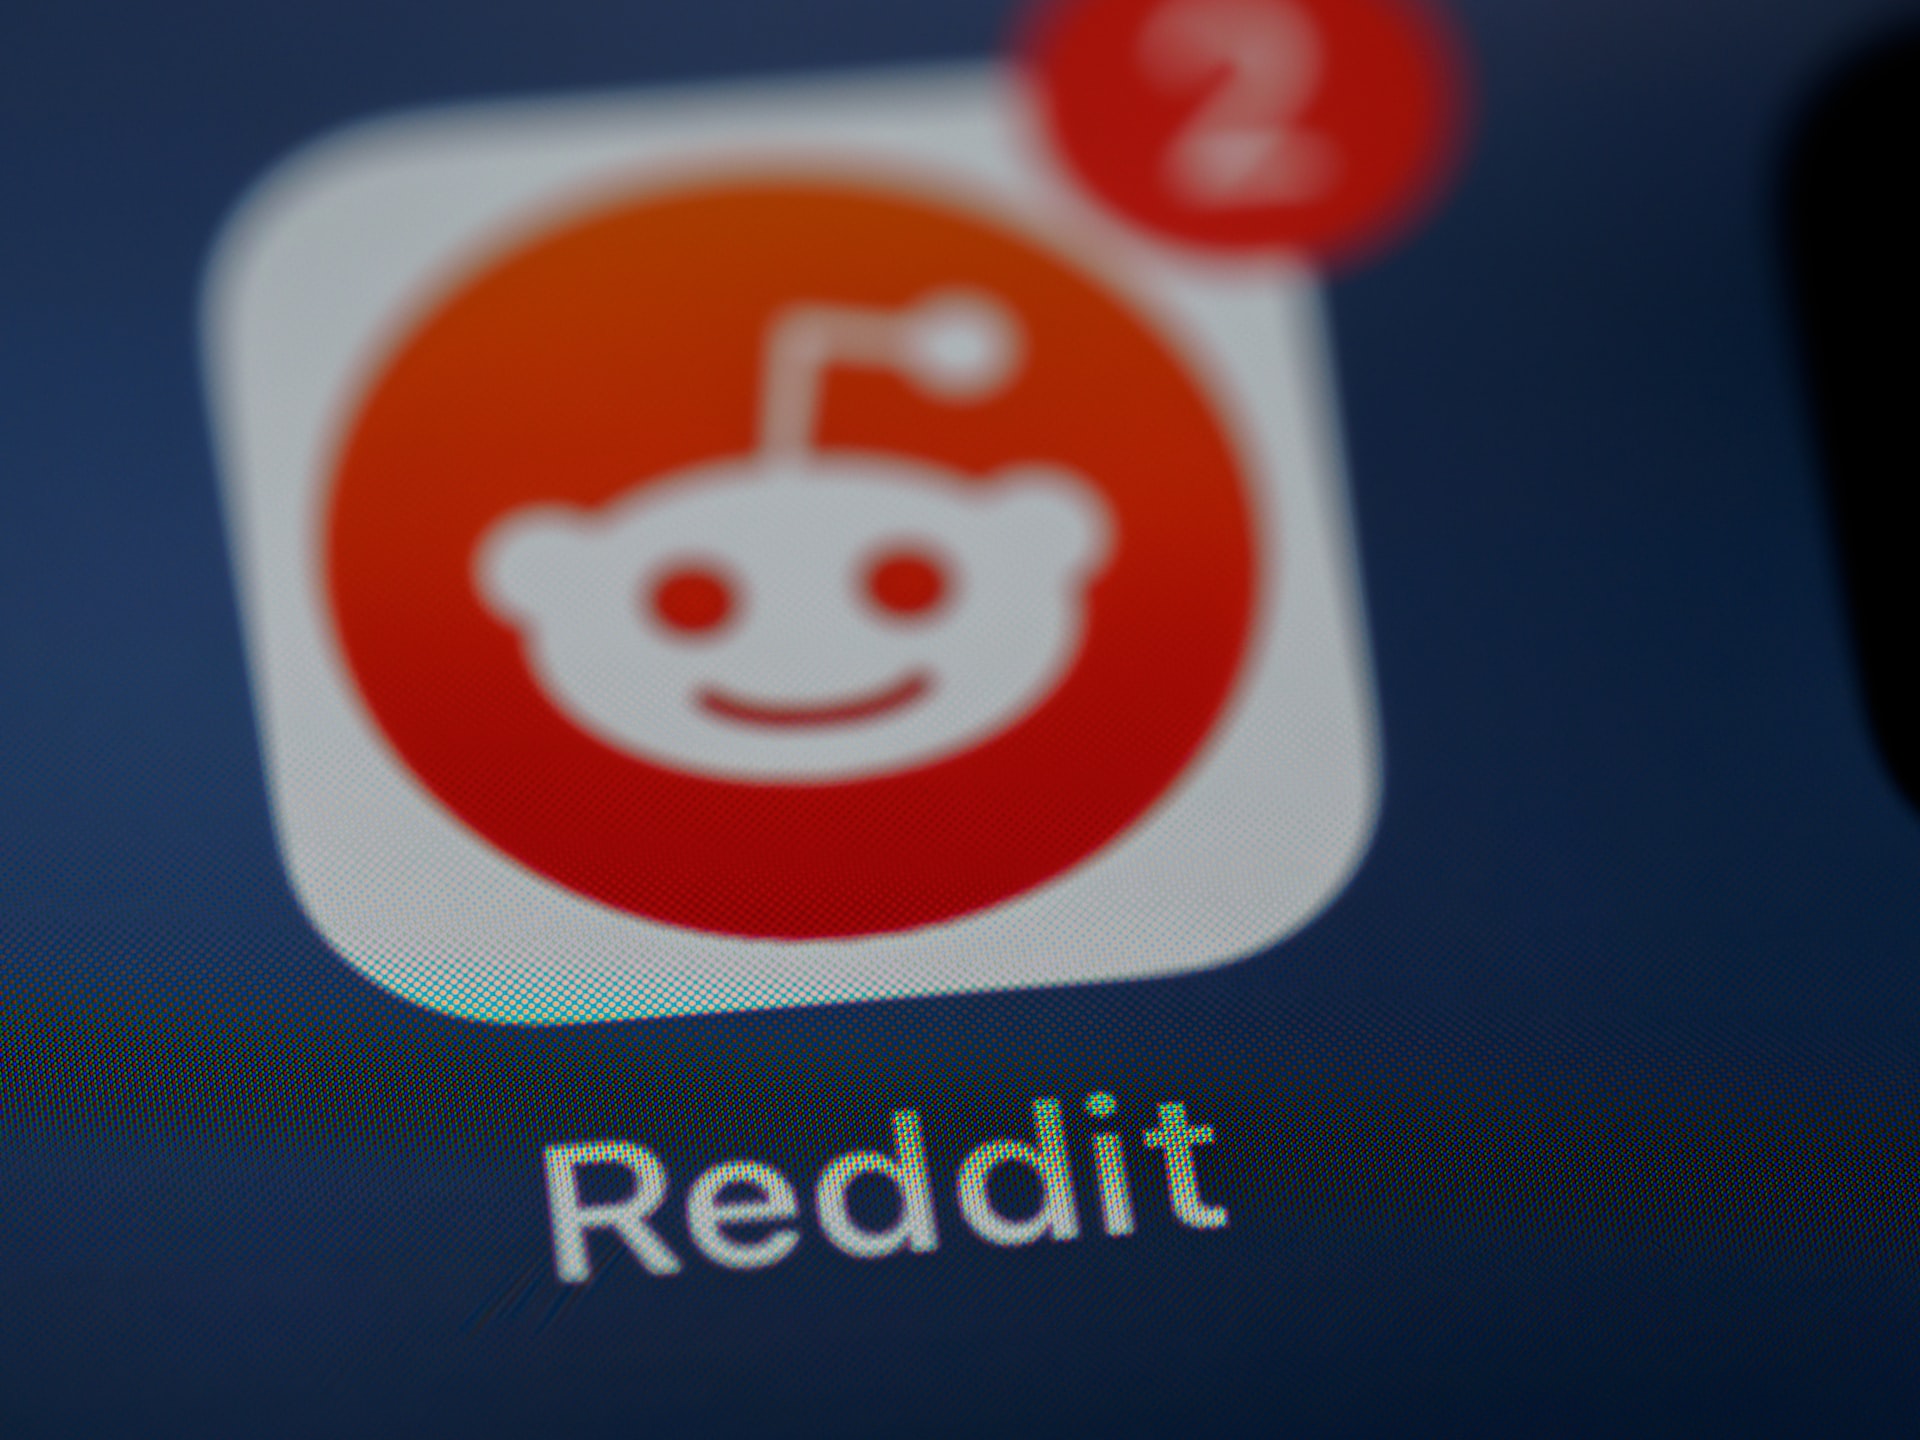 Download Reddit Videos on Android and iOS